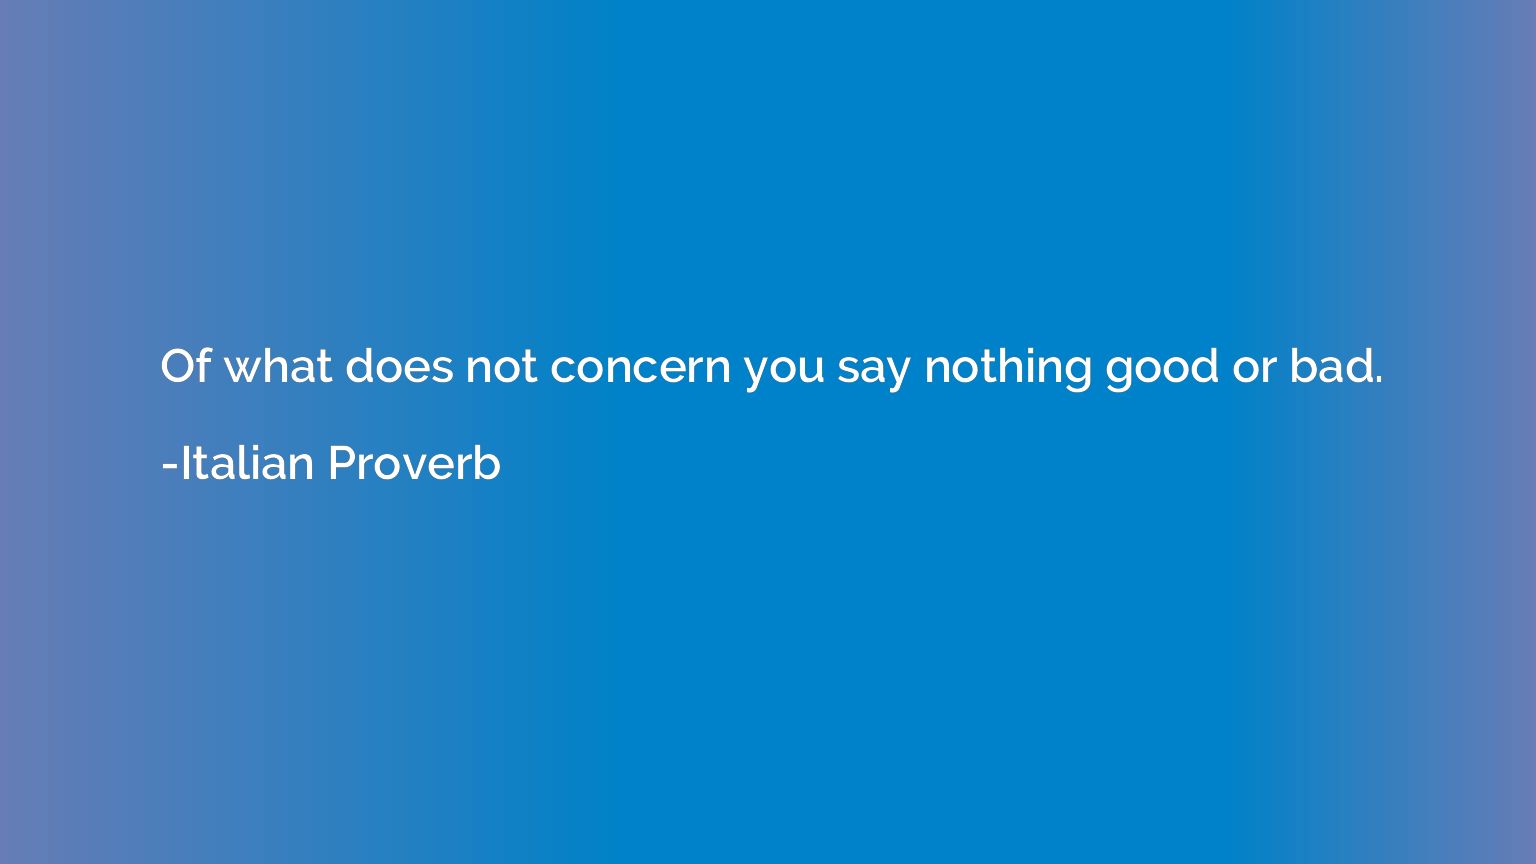 Of what does not concern you say nothing good or bad.